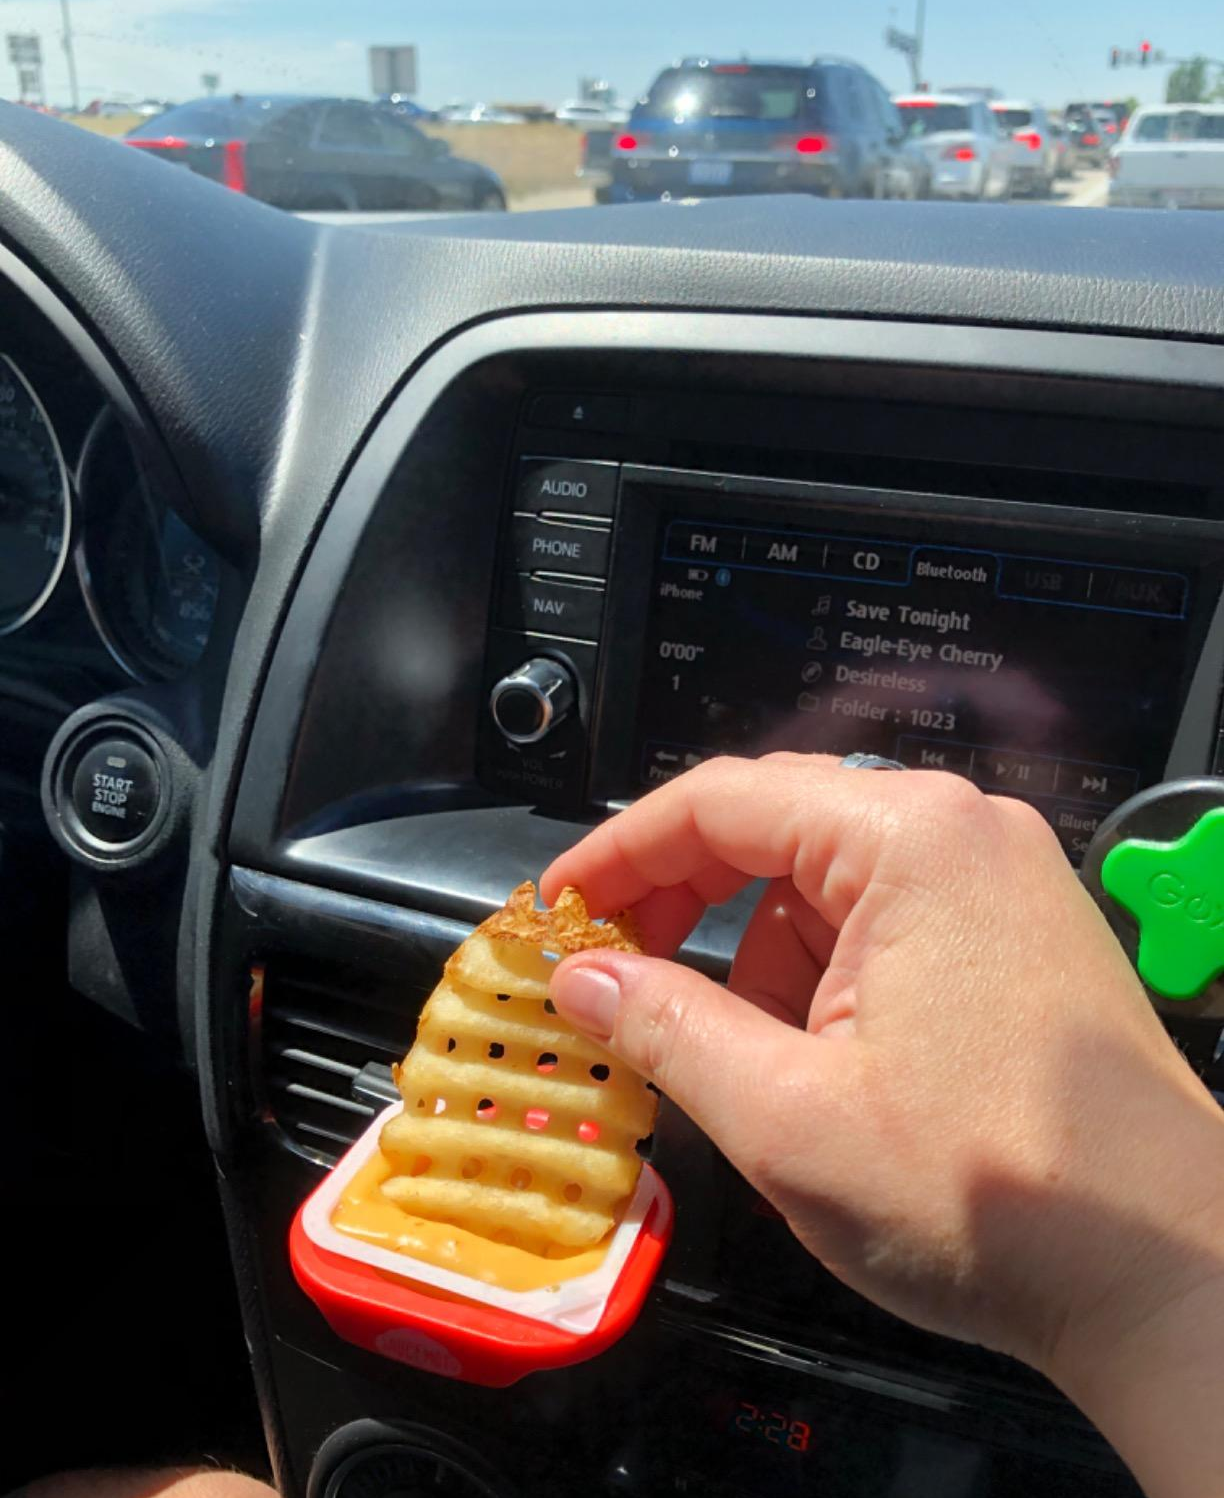 45 Cool Car Gadgets & Accessories You Can Buy on